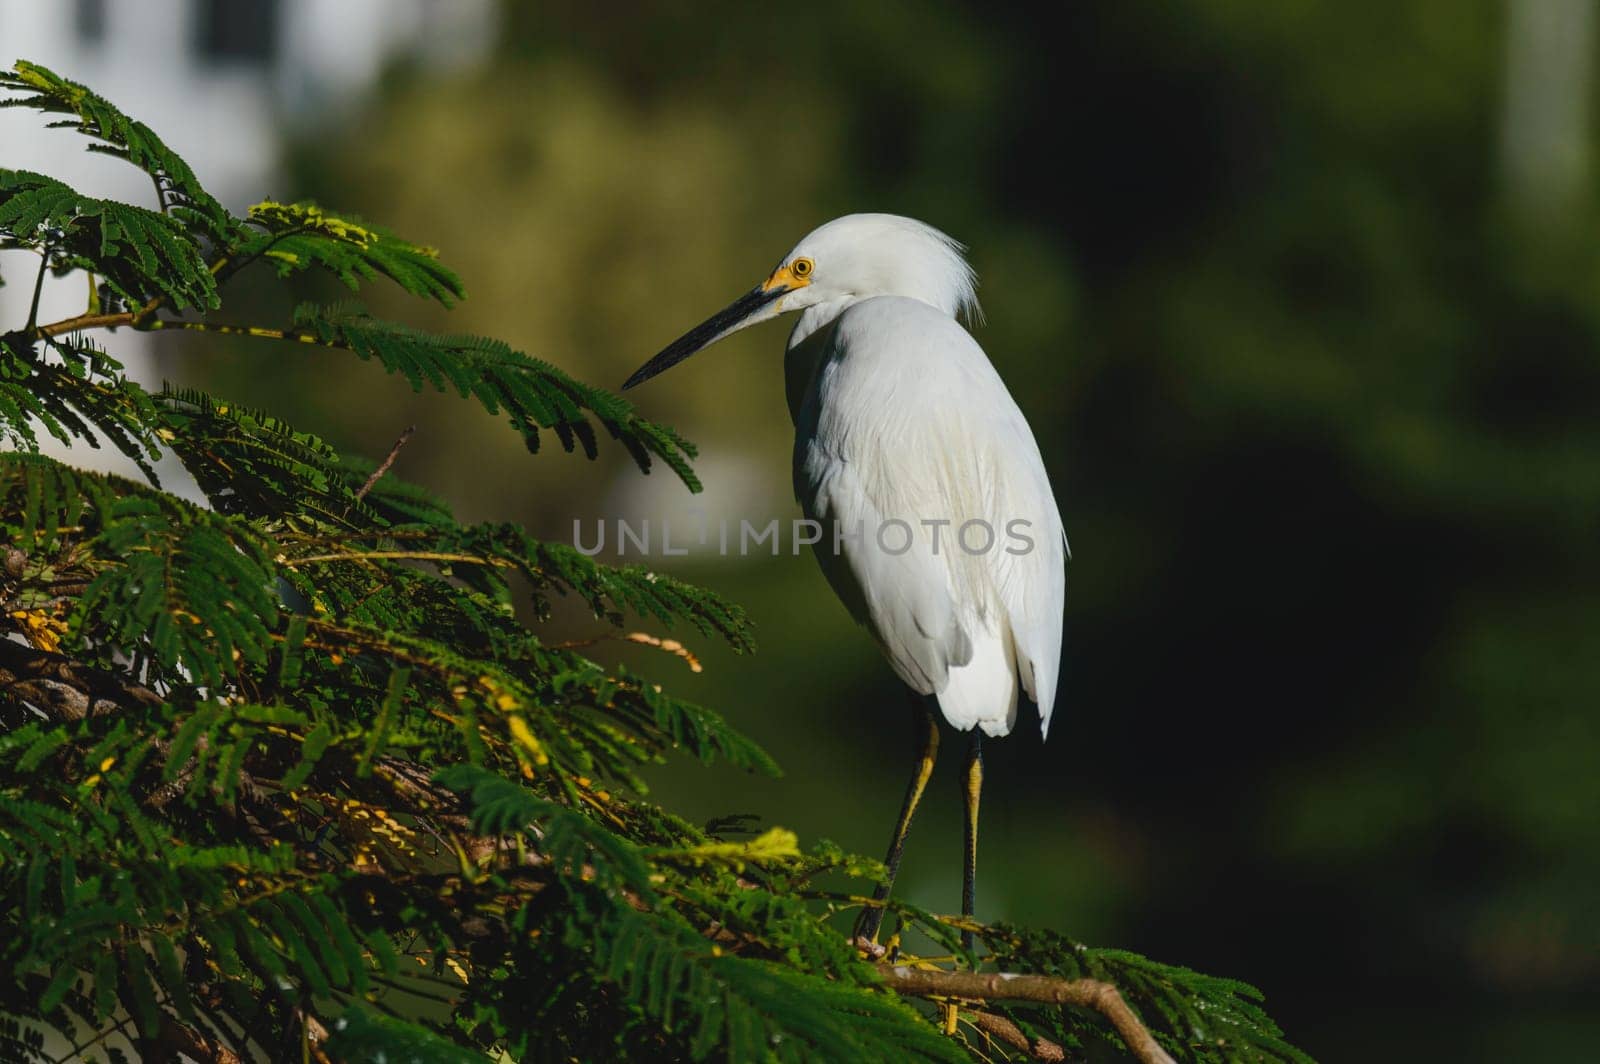 Snowy Egret Perched in Tree in Late Afternoon Sunshine, Villahermosa, Tabasco by RobertPB